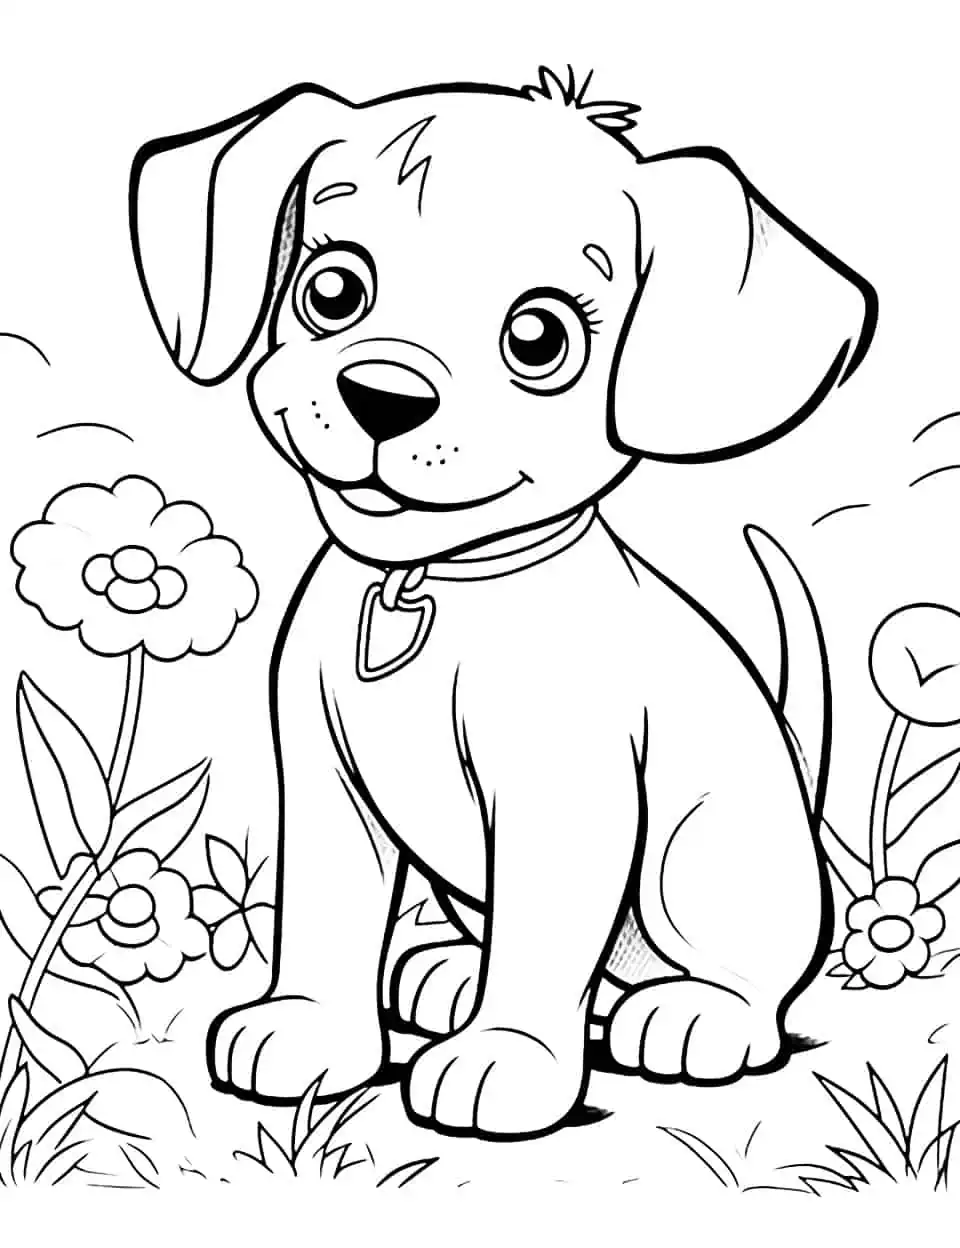 Baby Dog's Adventure Coloring Page - A coloring book story about a baby dog's adventure in the park.